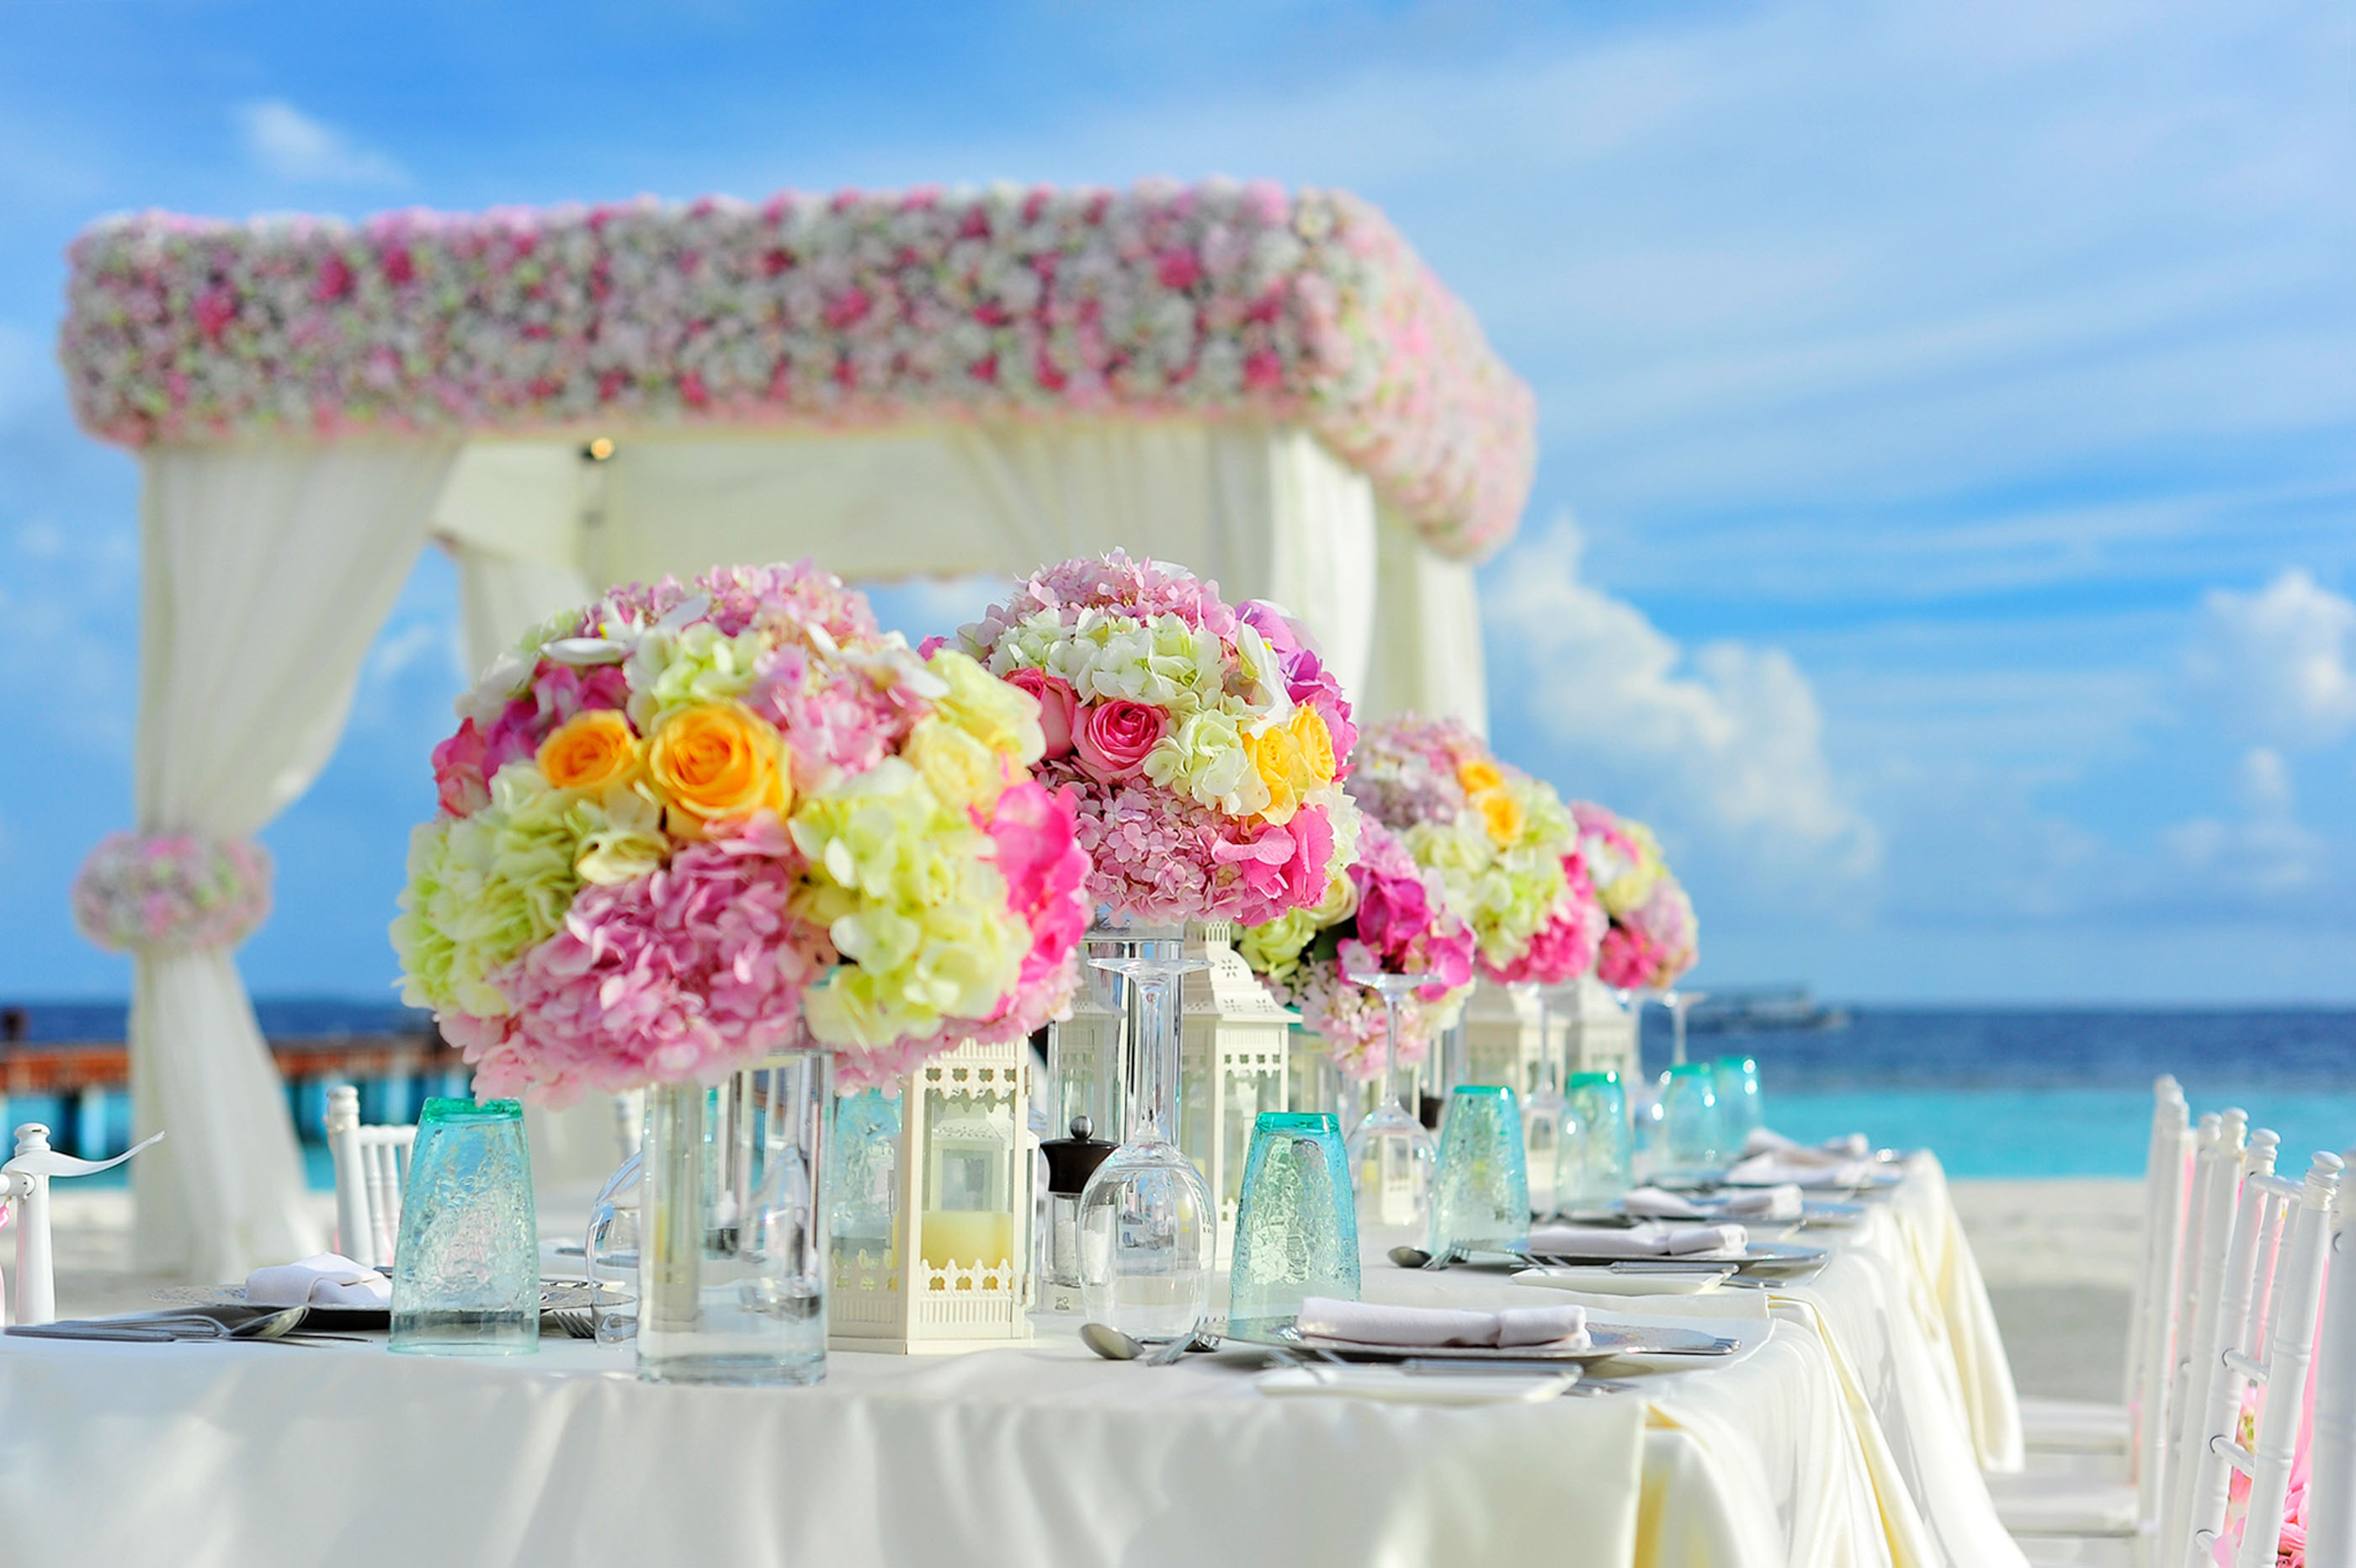 Yellow and Pink Petaled Flowers on Table Near Ocean Under Blue Sky at Daytime